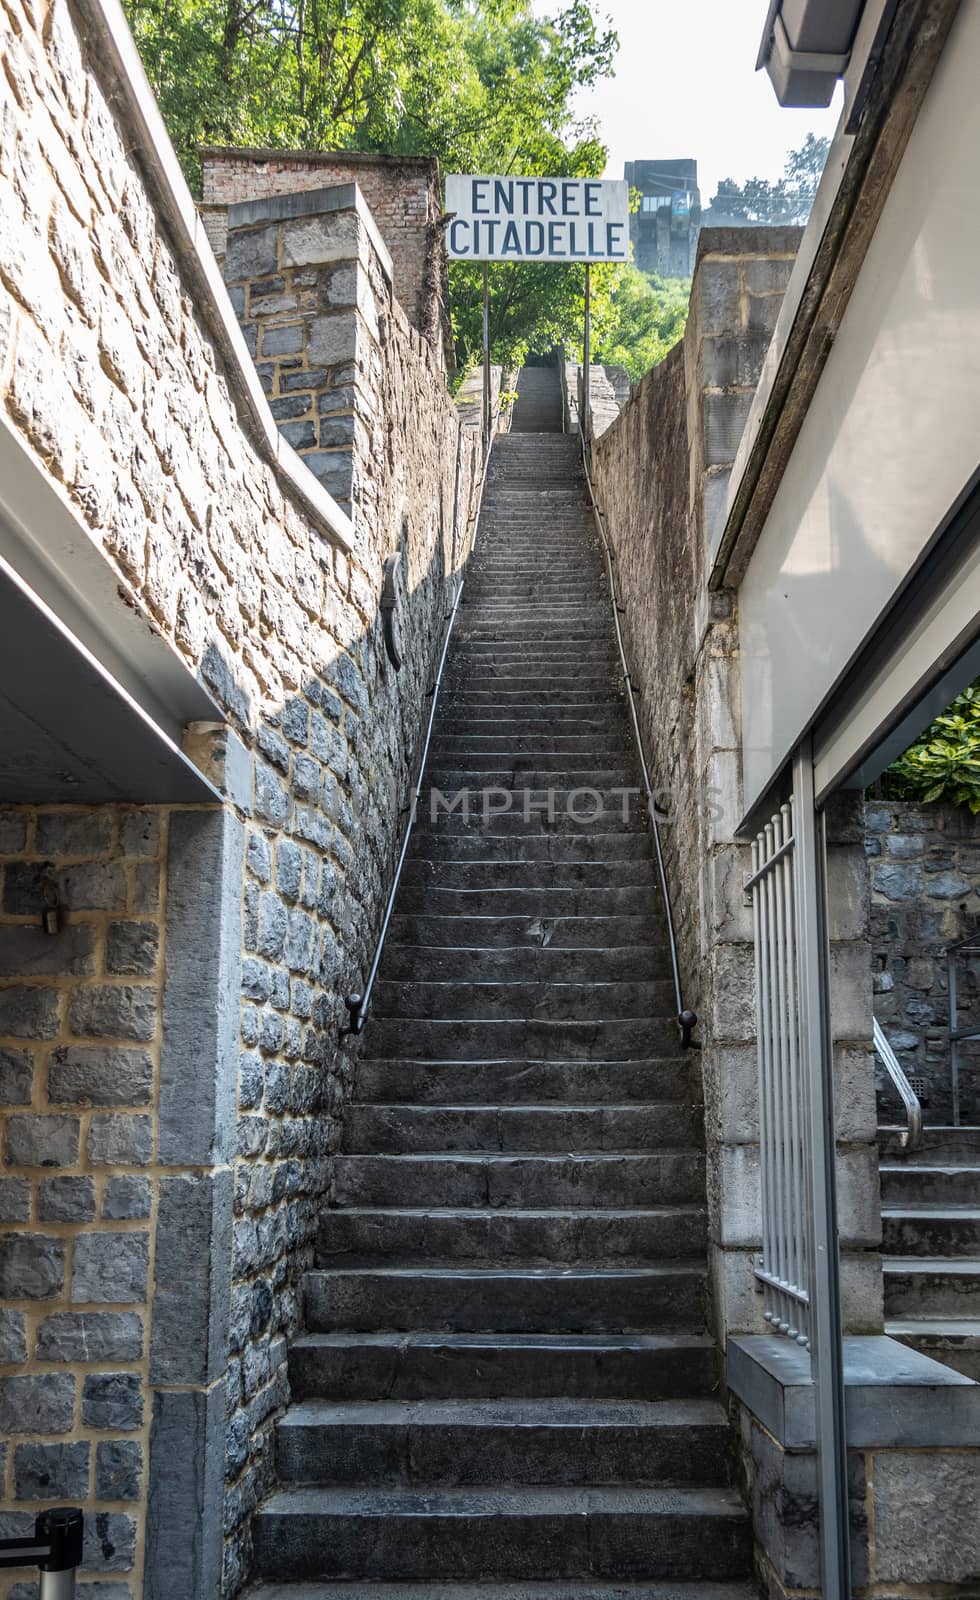 Entrance to the long stairway up to citadel, Dinant, Belgium. by Claudine